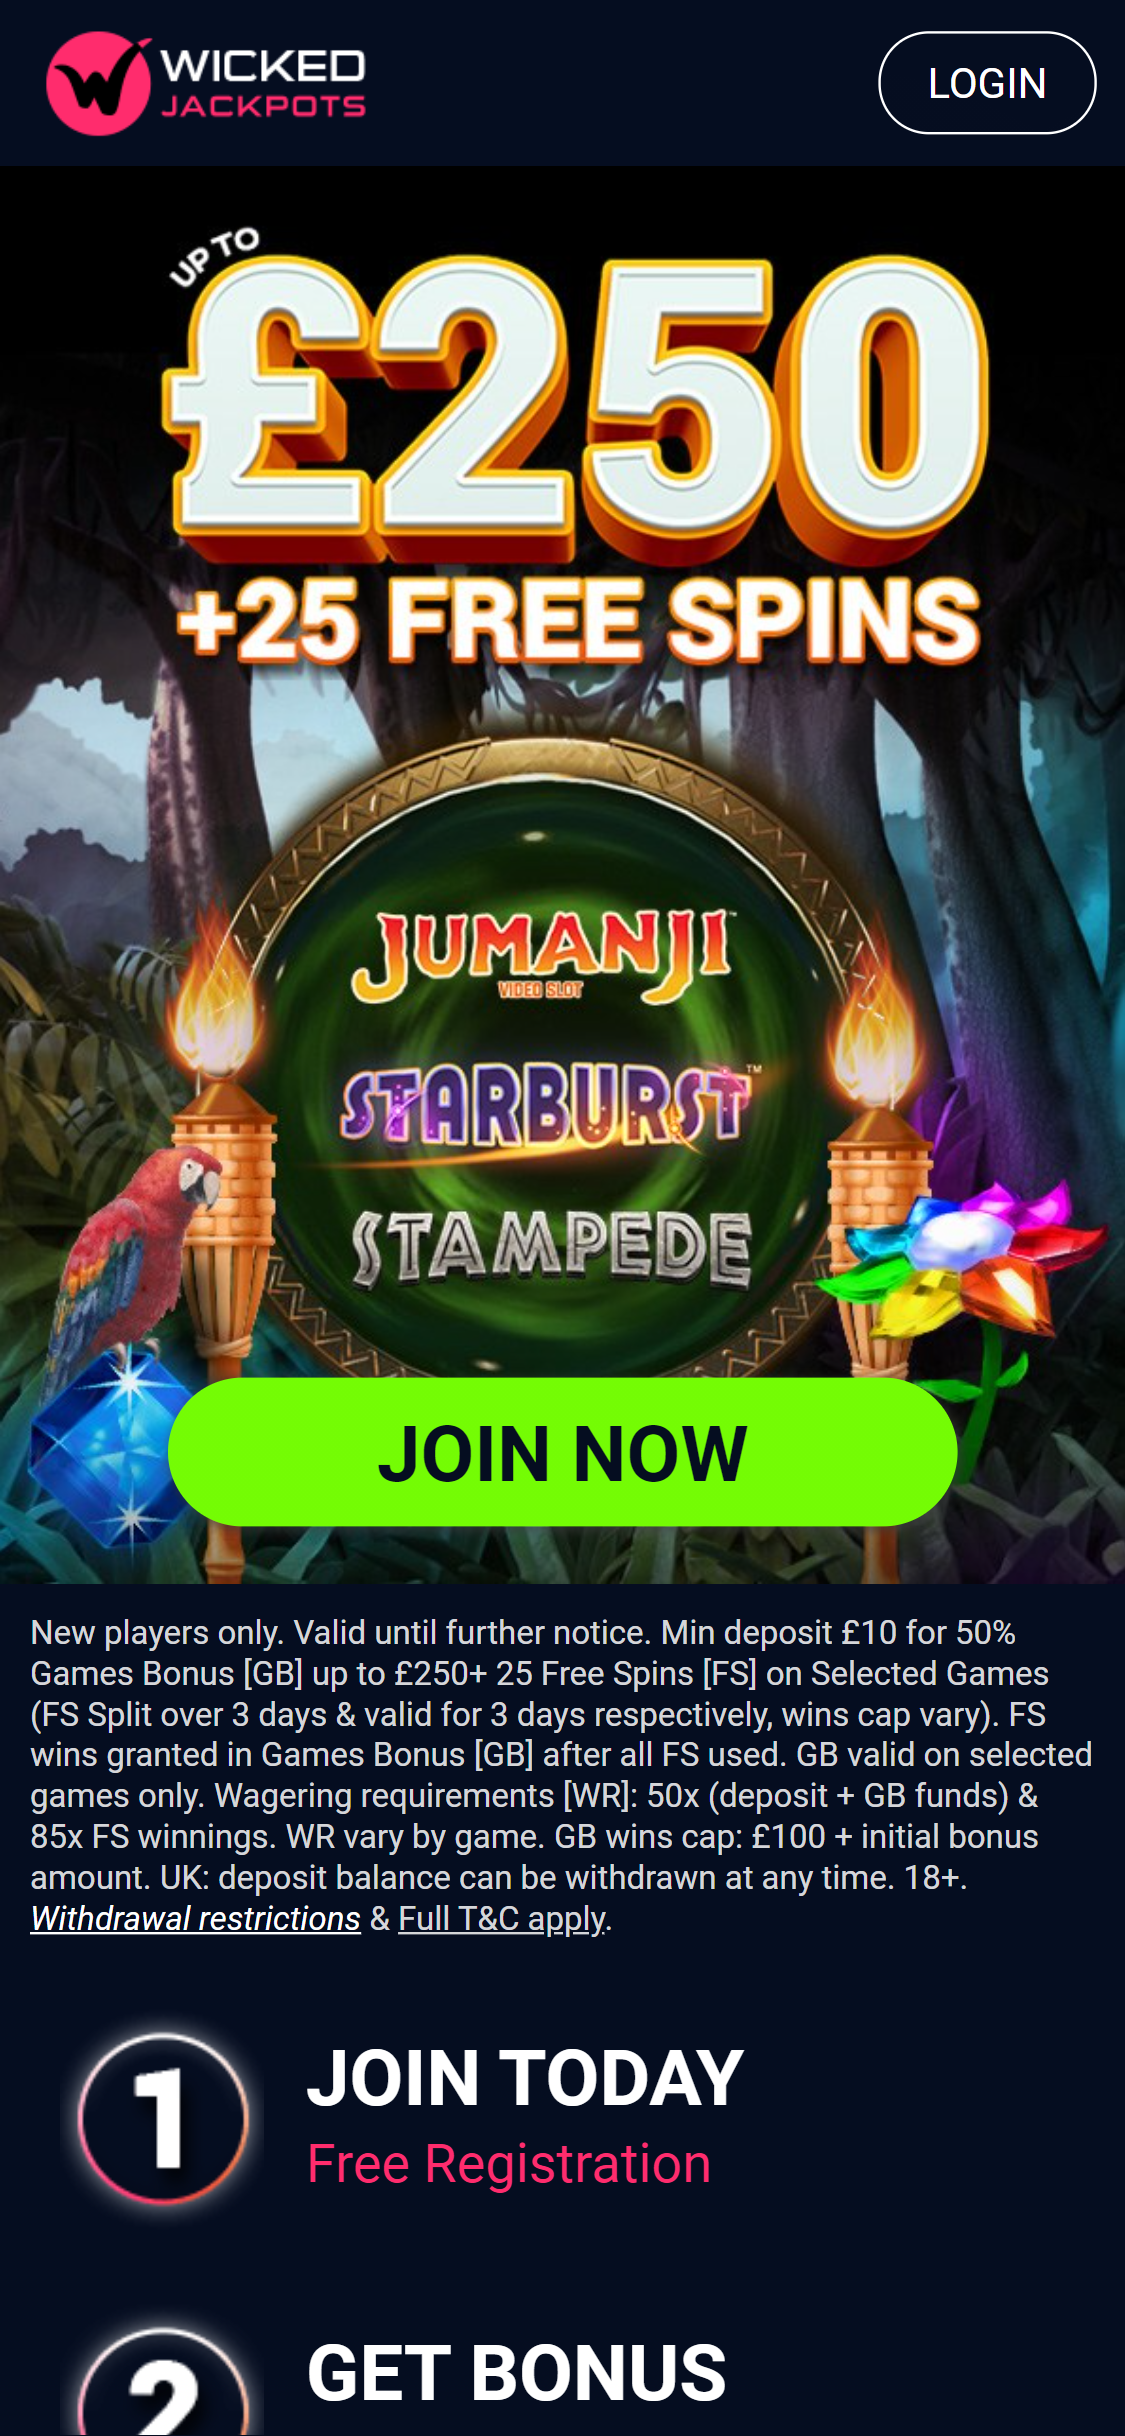 Wicked Jackpots Casino Mobile Review